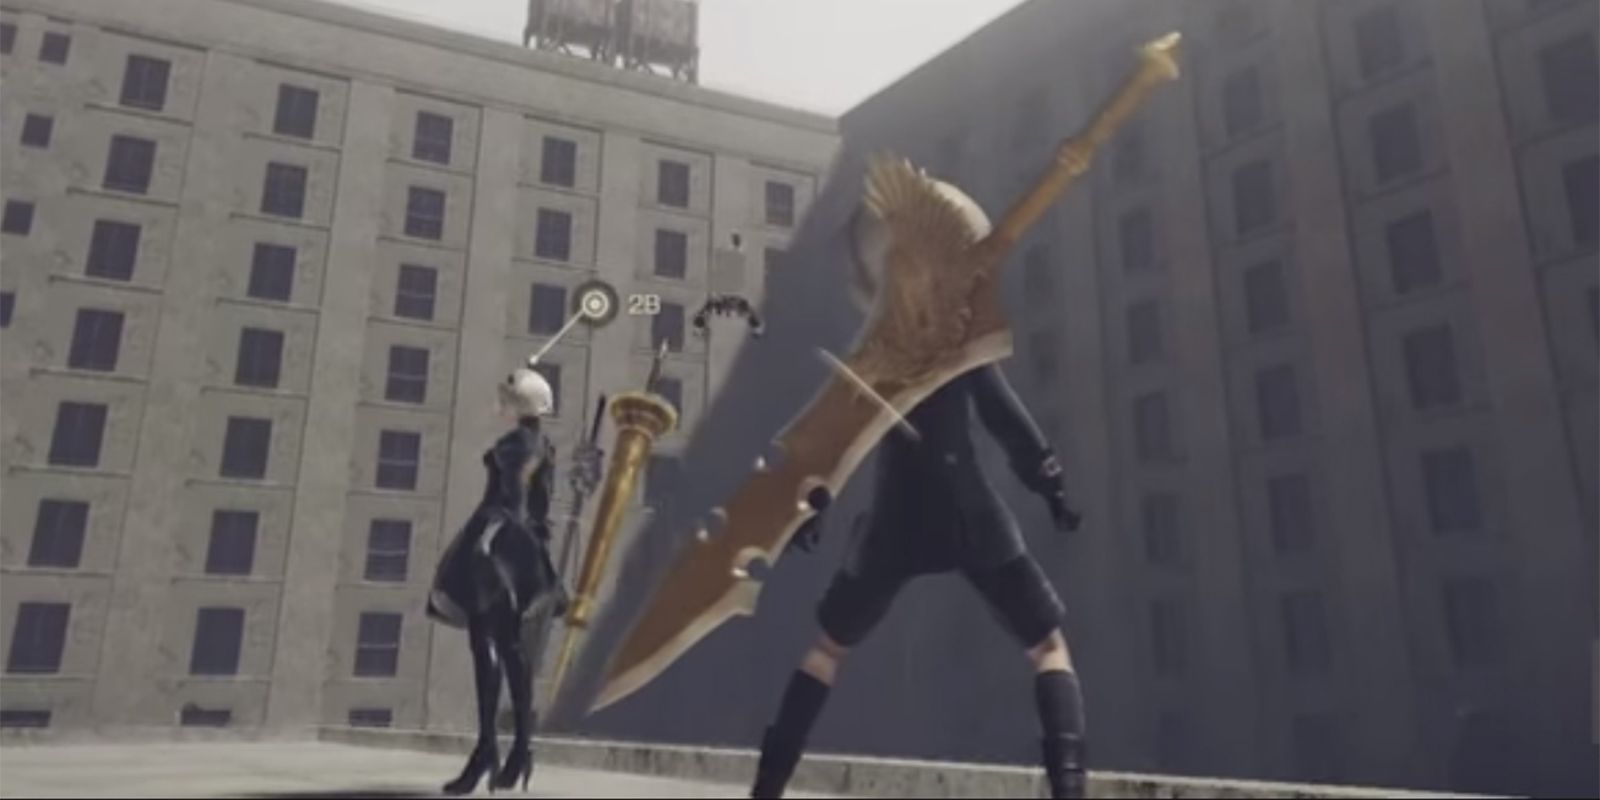 2B and 9S standing on rooftop in City Ruins in Nier Automata